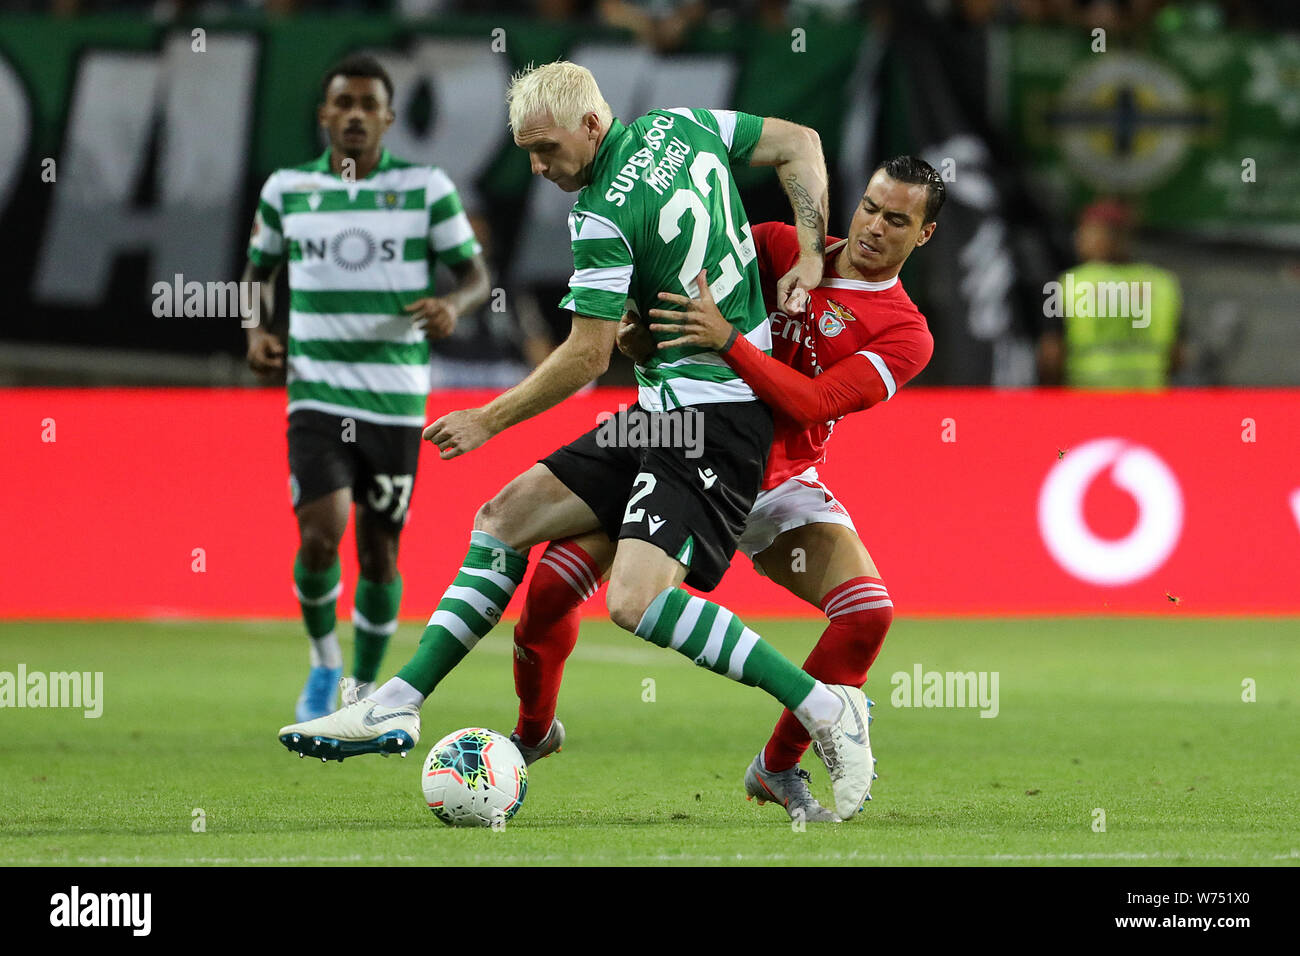 Lisbon, Portugal. 04th Aug, 2019. Jérémy Mathieu of Sporting CP (L) vies  for the ball with Raul de Tomás of SL Benfica (R) during the Final Cândido  de Oliveira SuperCup 2019 football